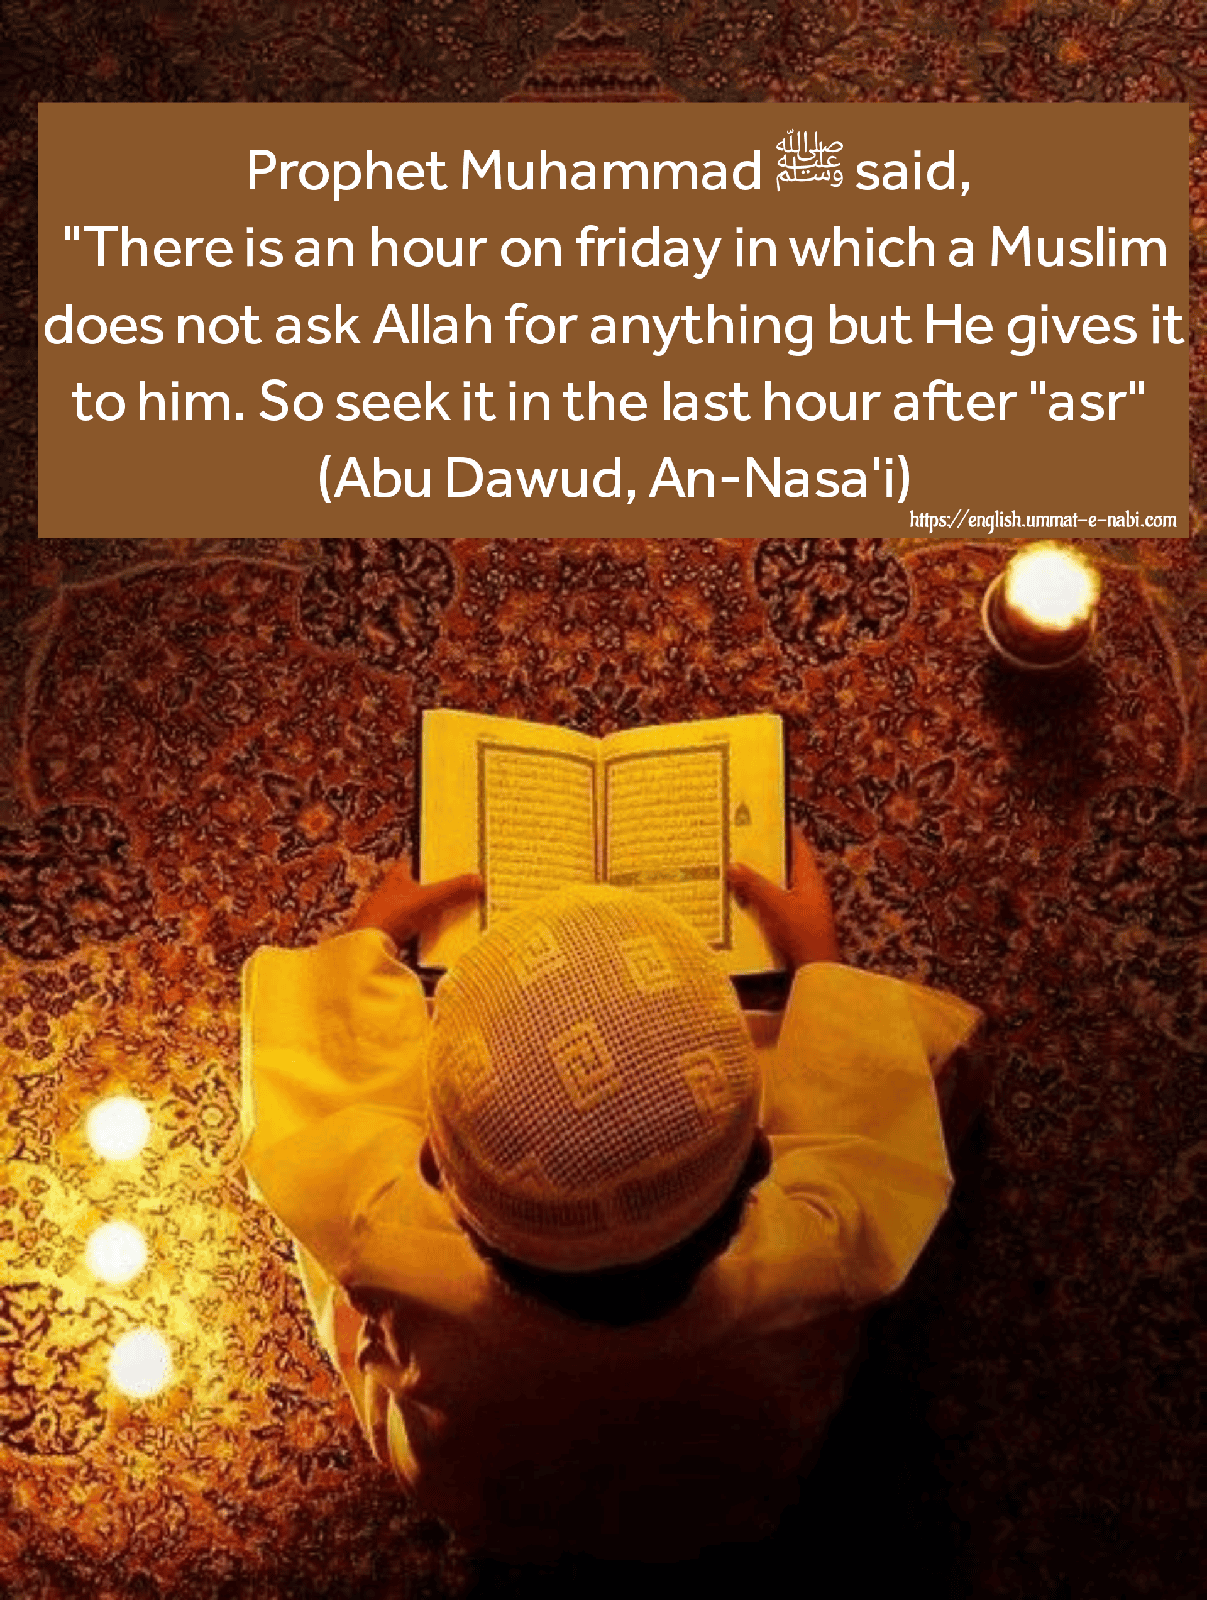 Friday Dua Quotes dua after asr on friday